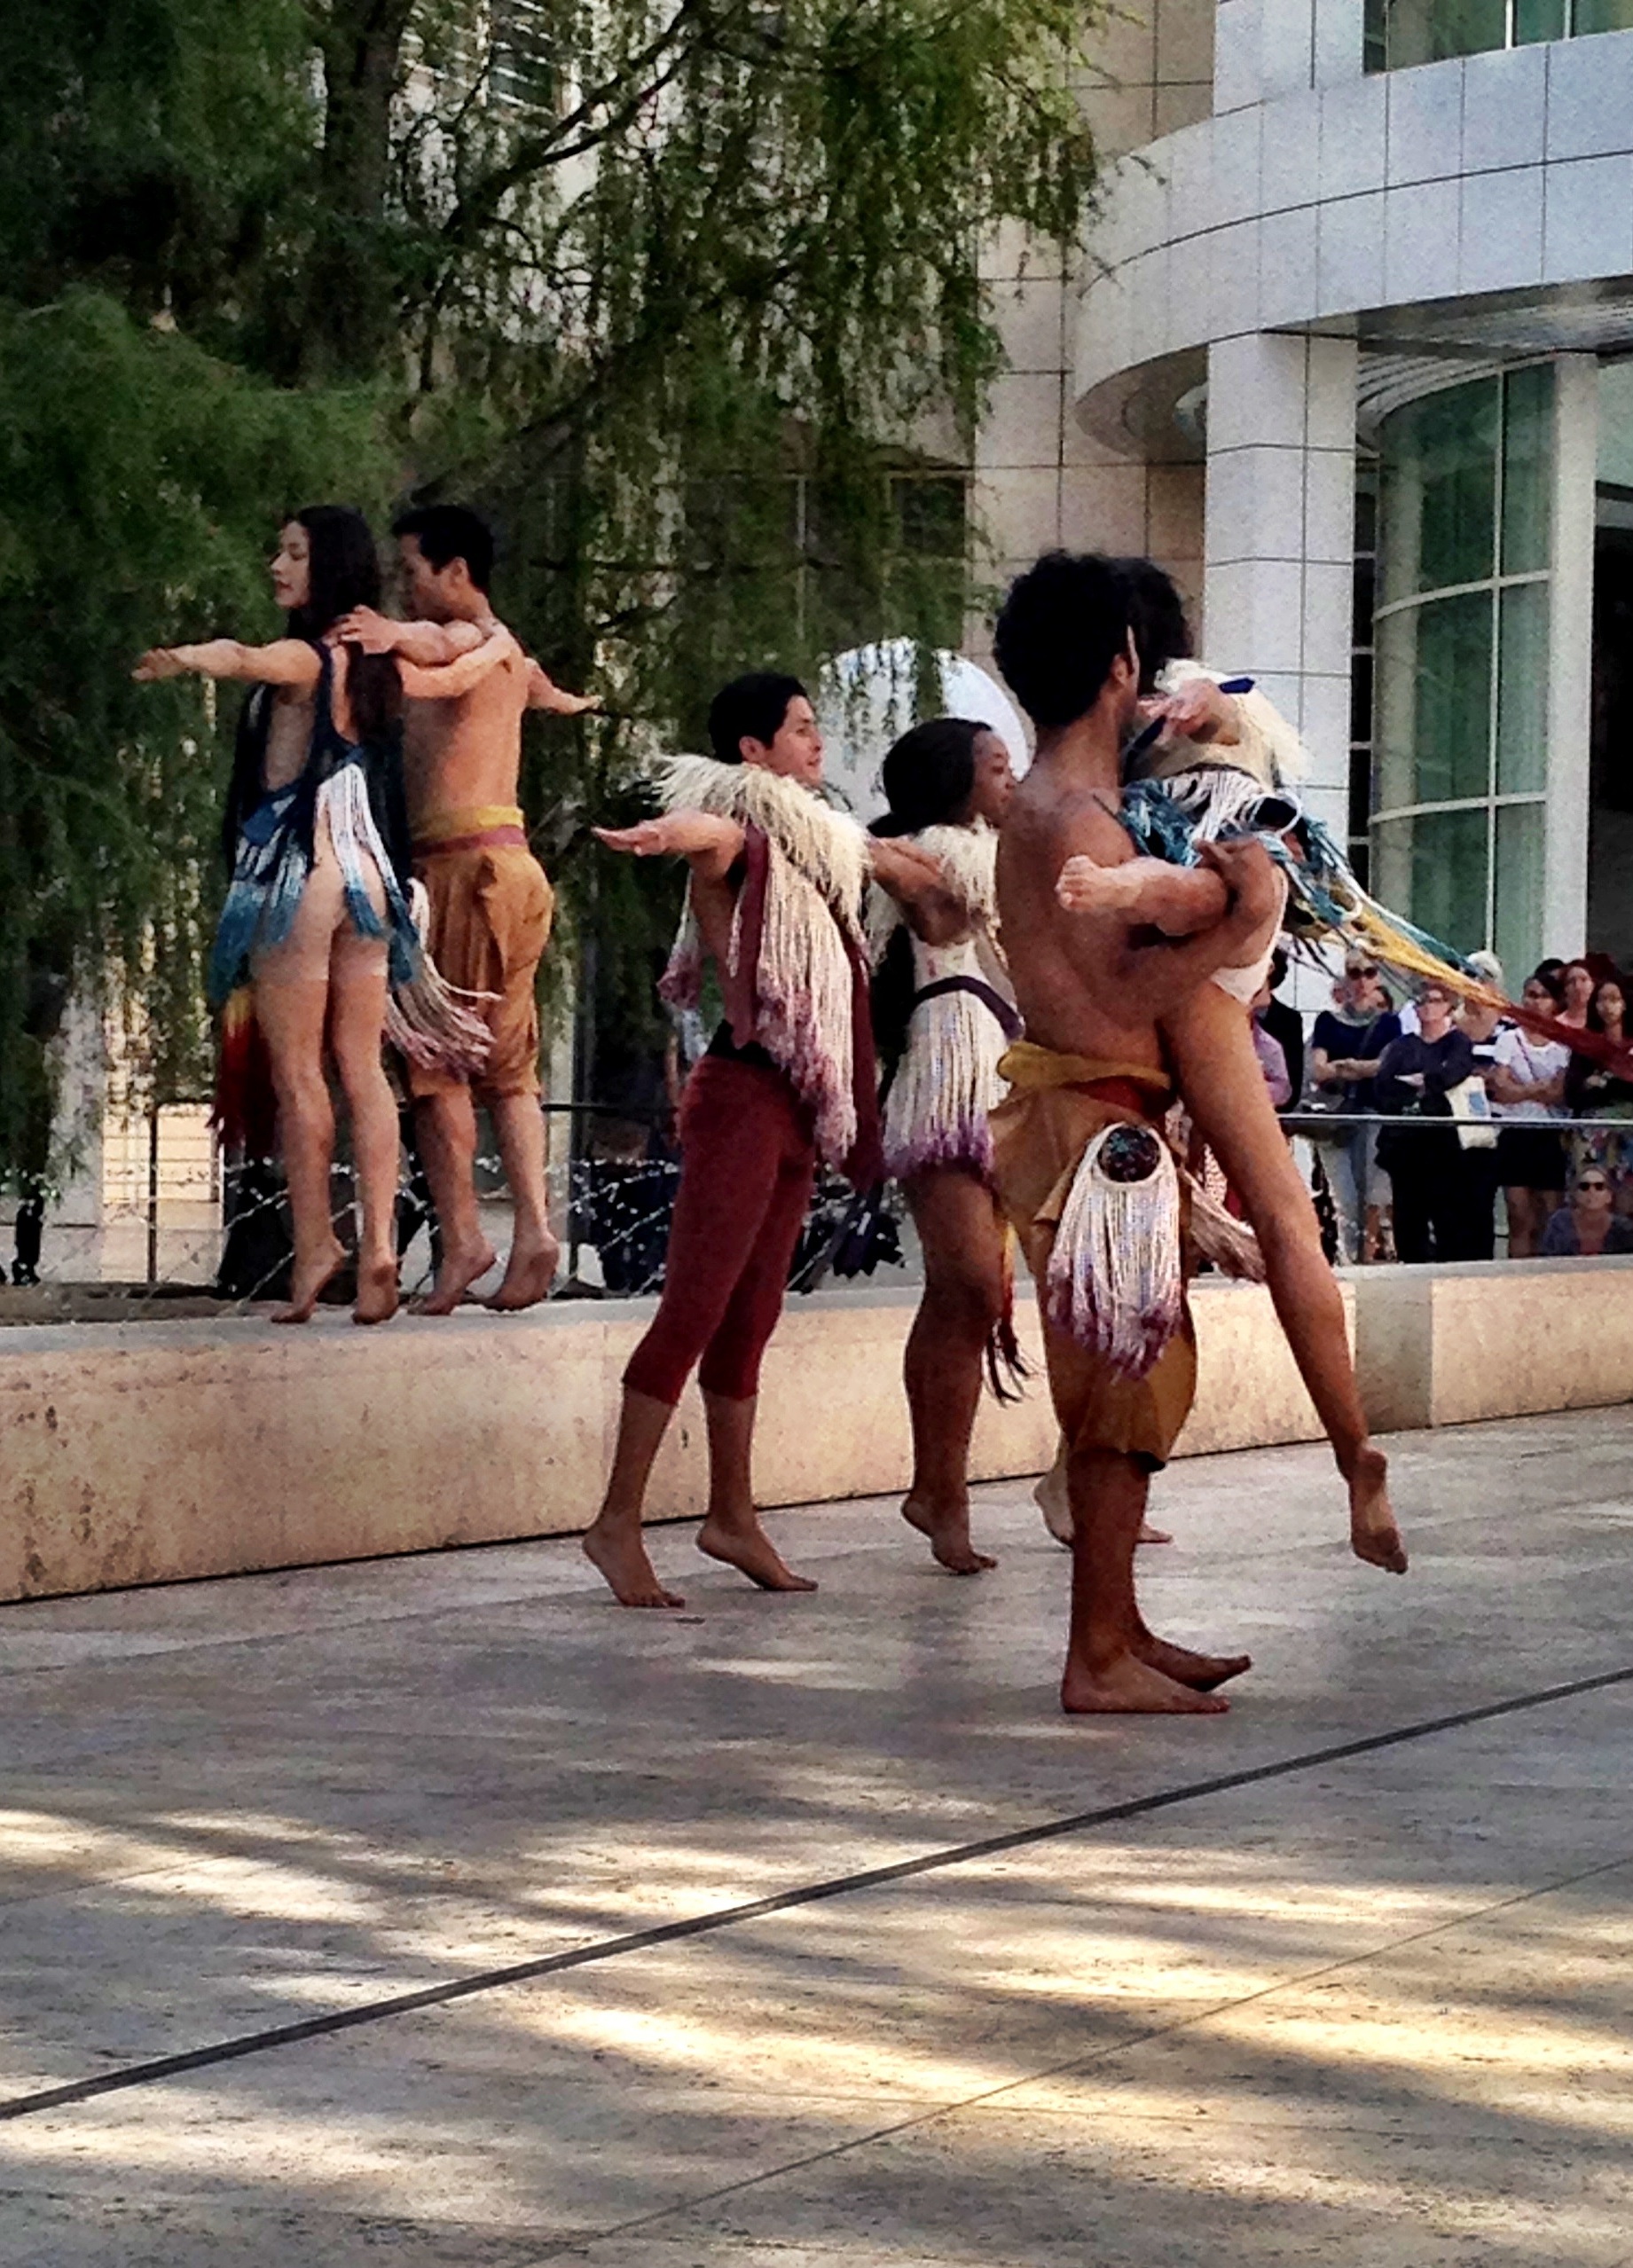 tiger lily - performed @ getty for dcw "get wet" series